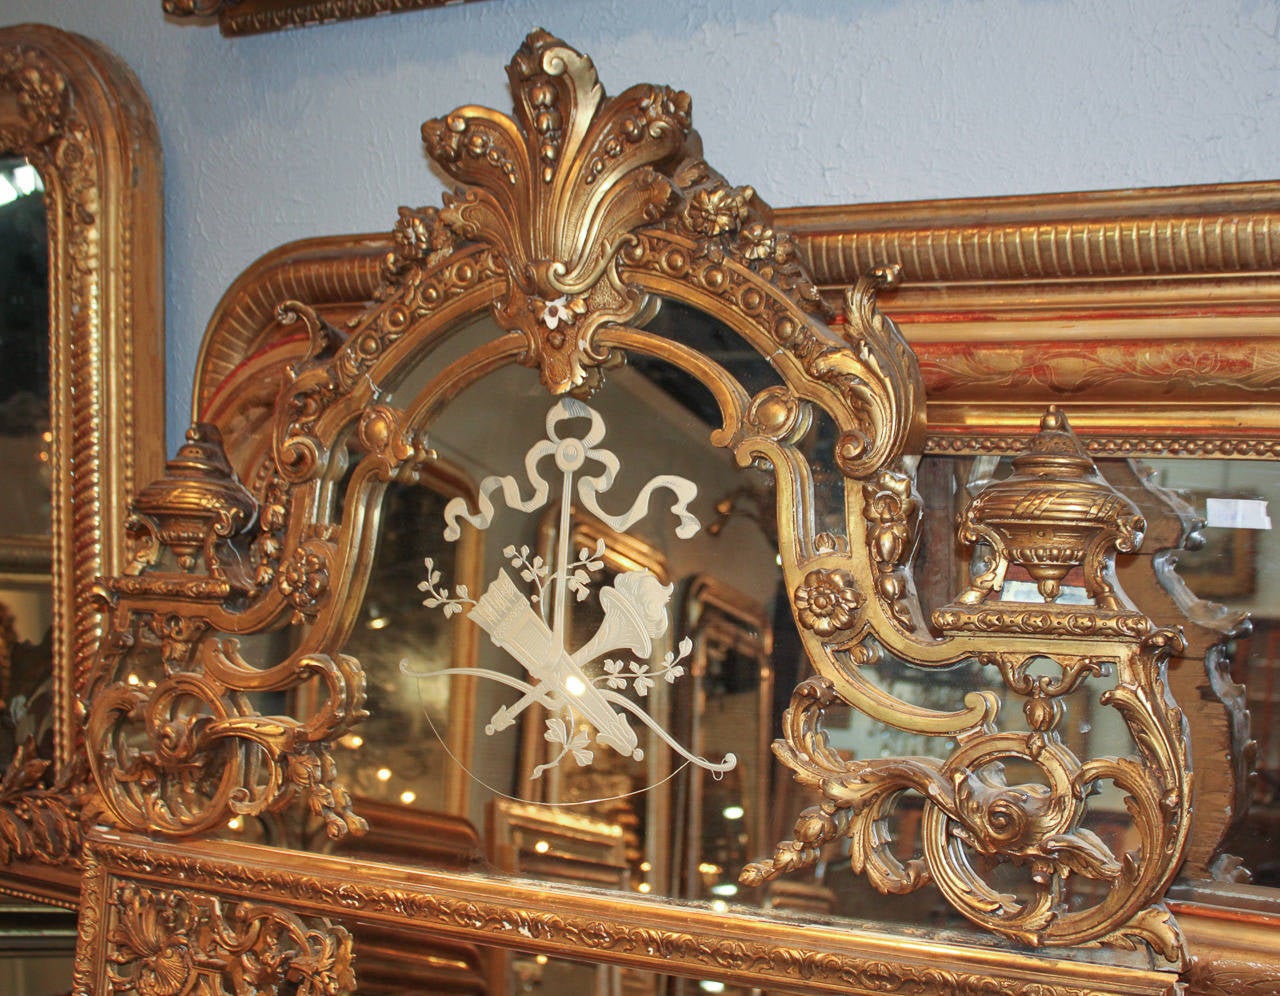 Stunning giltwood French Napoleon III mirror with elaborate mirrored cartouche. Having image of torch, quiver and bow in mirrored glass, large capped finials, and beveled glass. A sensational piece wonderful for numerous designs!